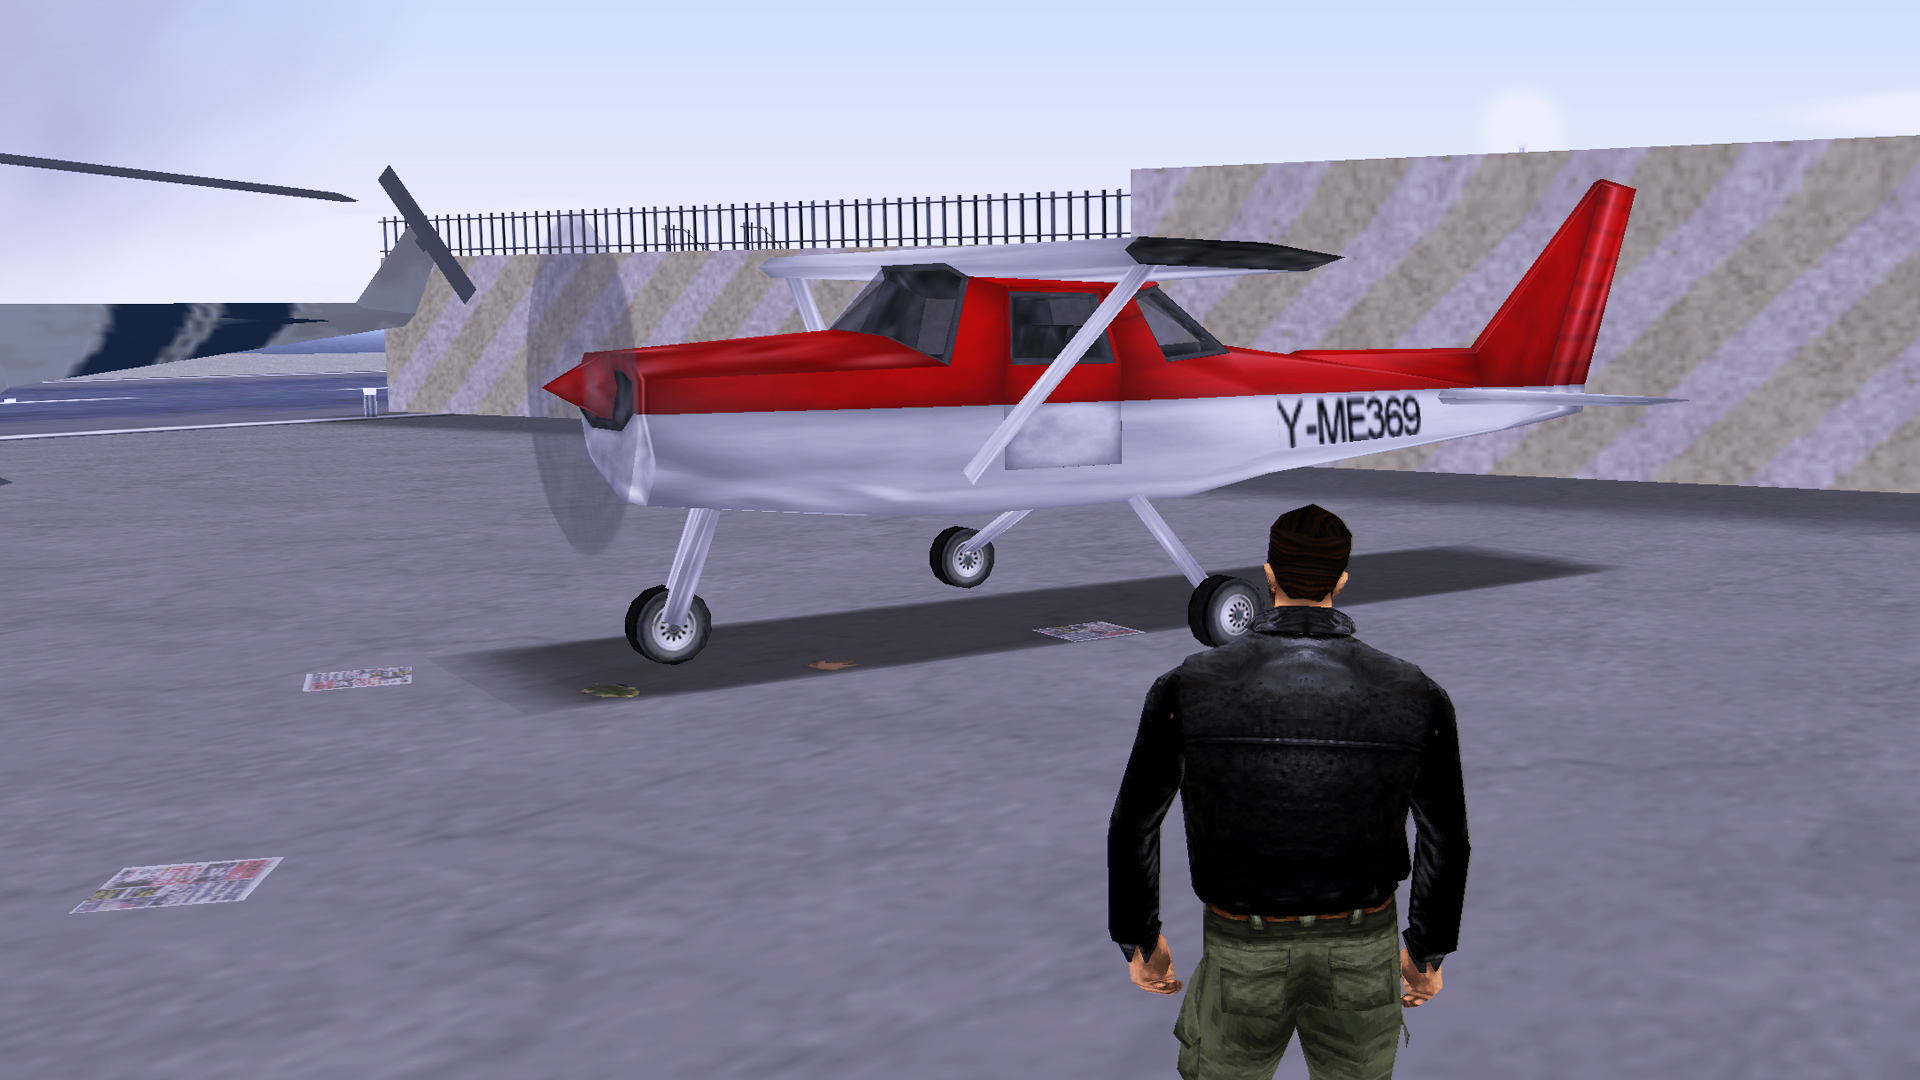 Fun fact: In GTA III, it was not possible to fly for a long time with the dodo